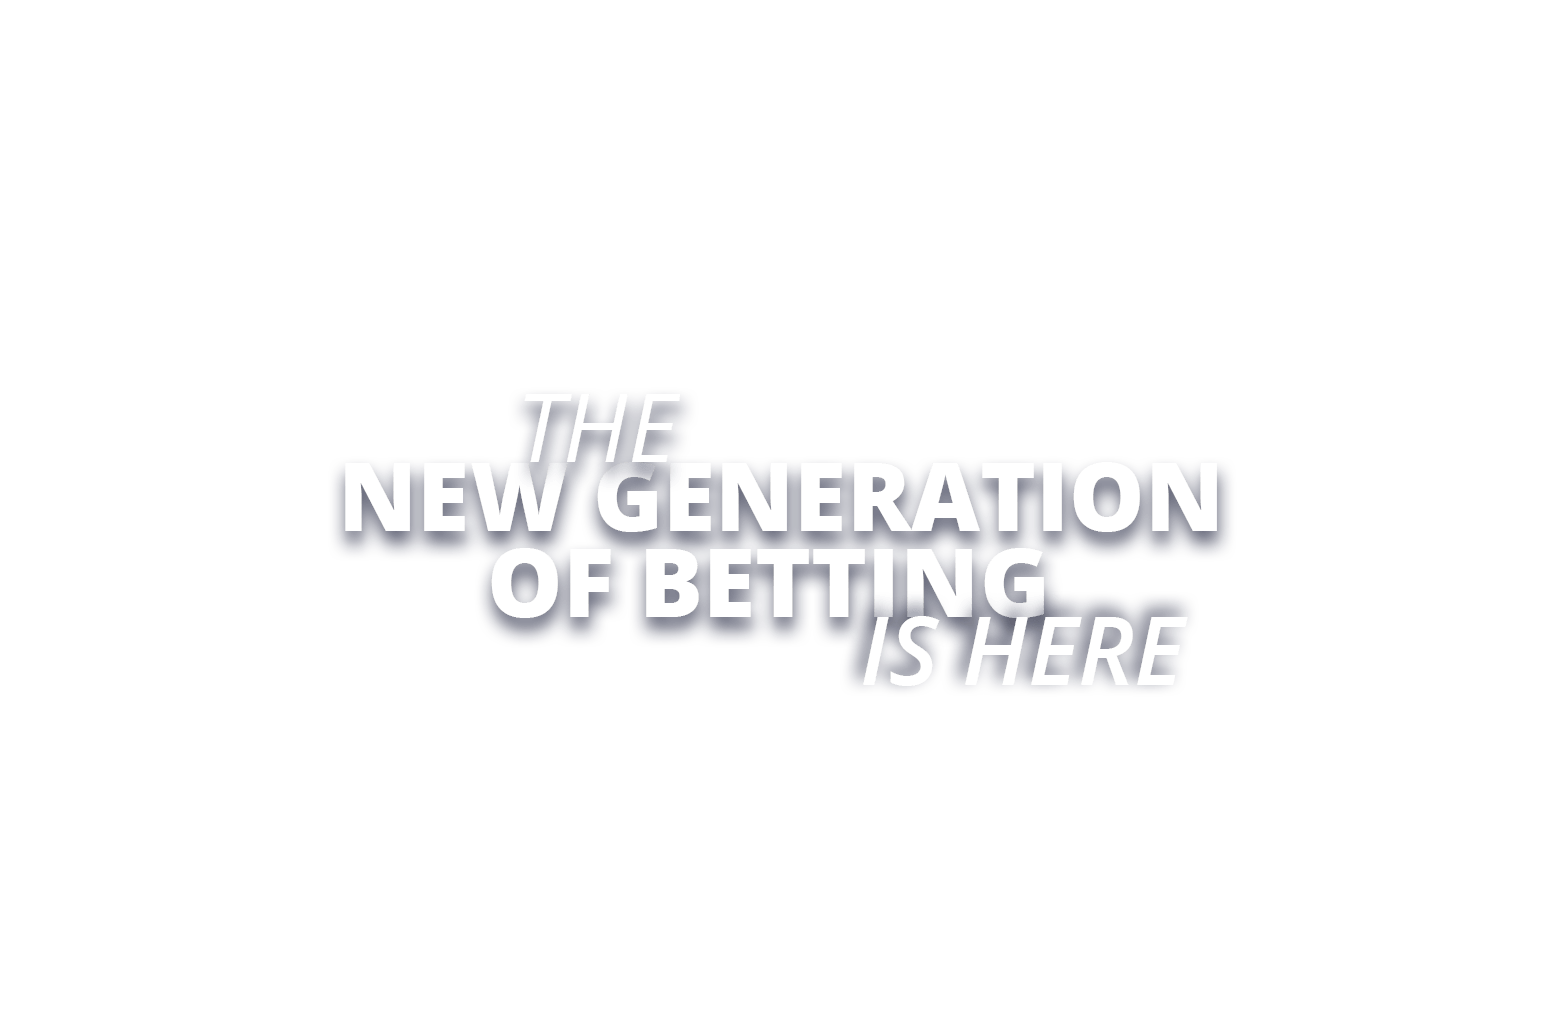 The New Generation of Betting is Here